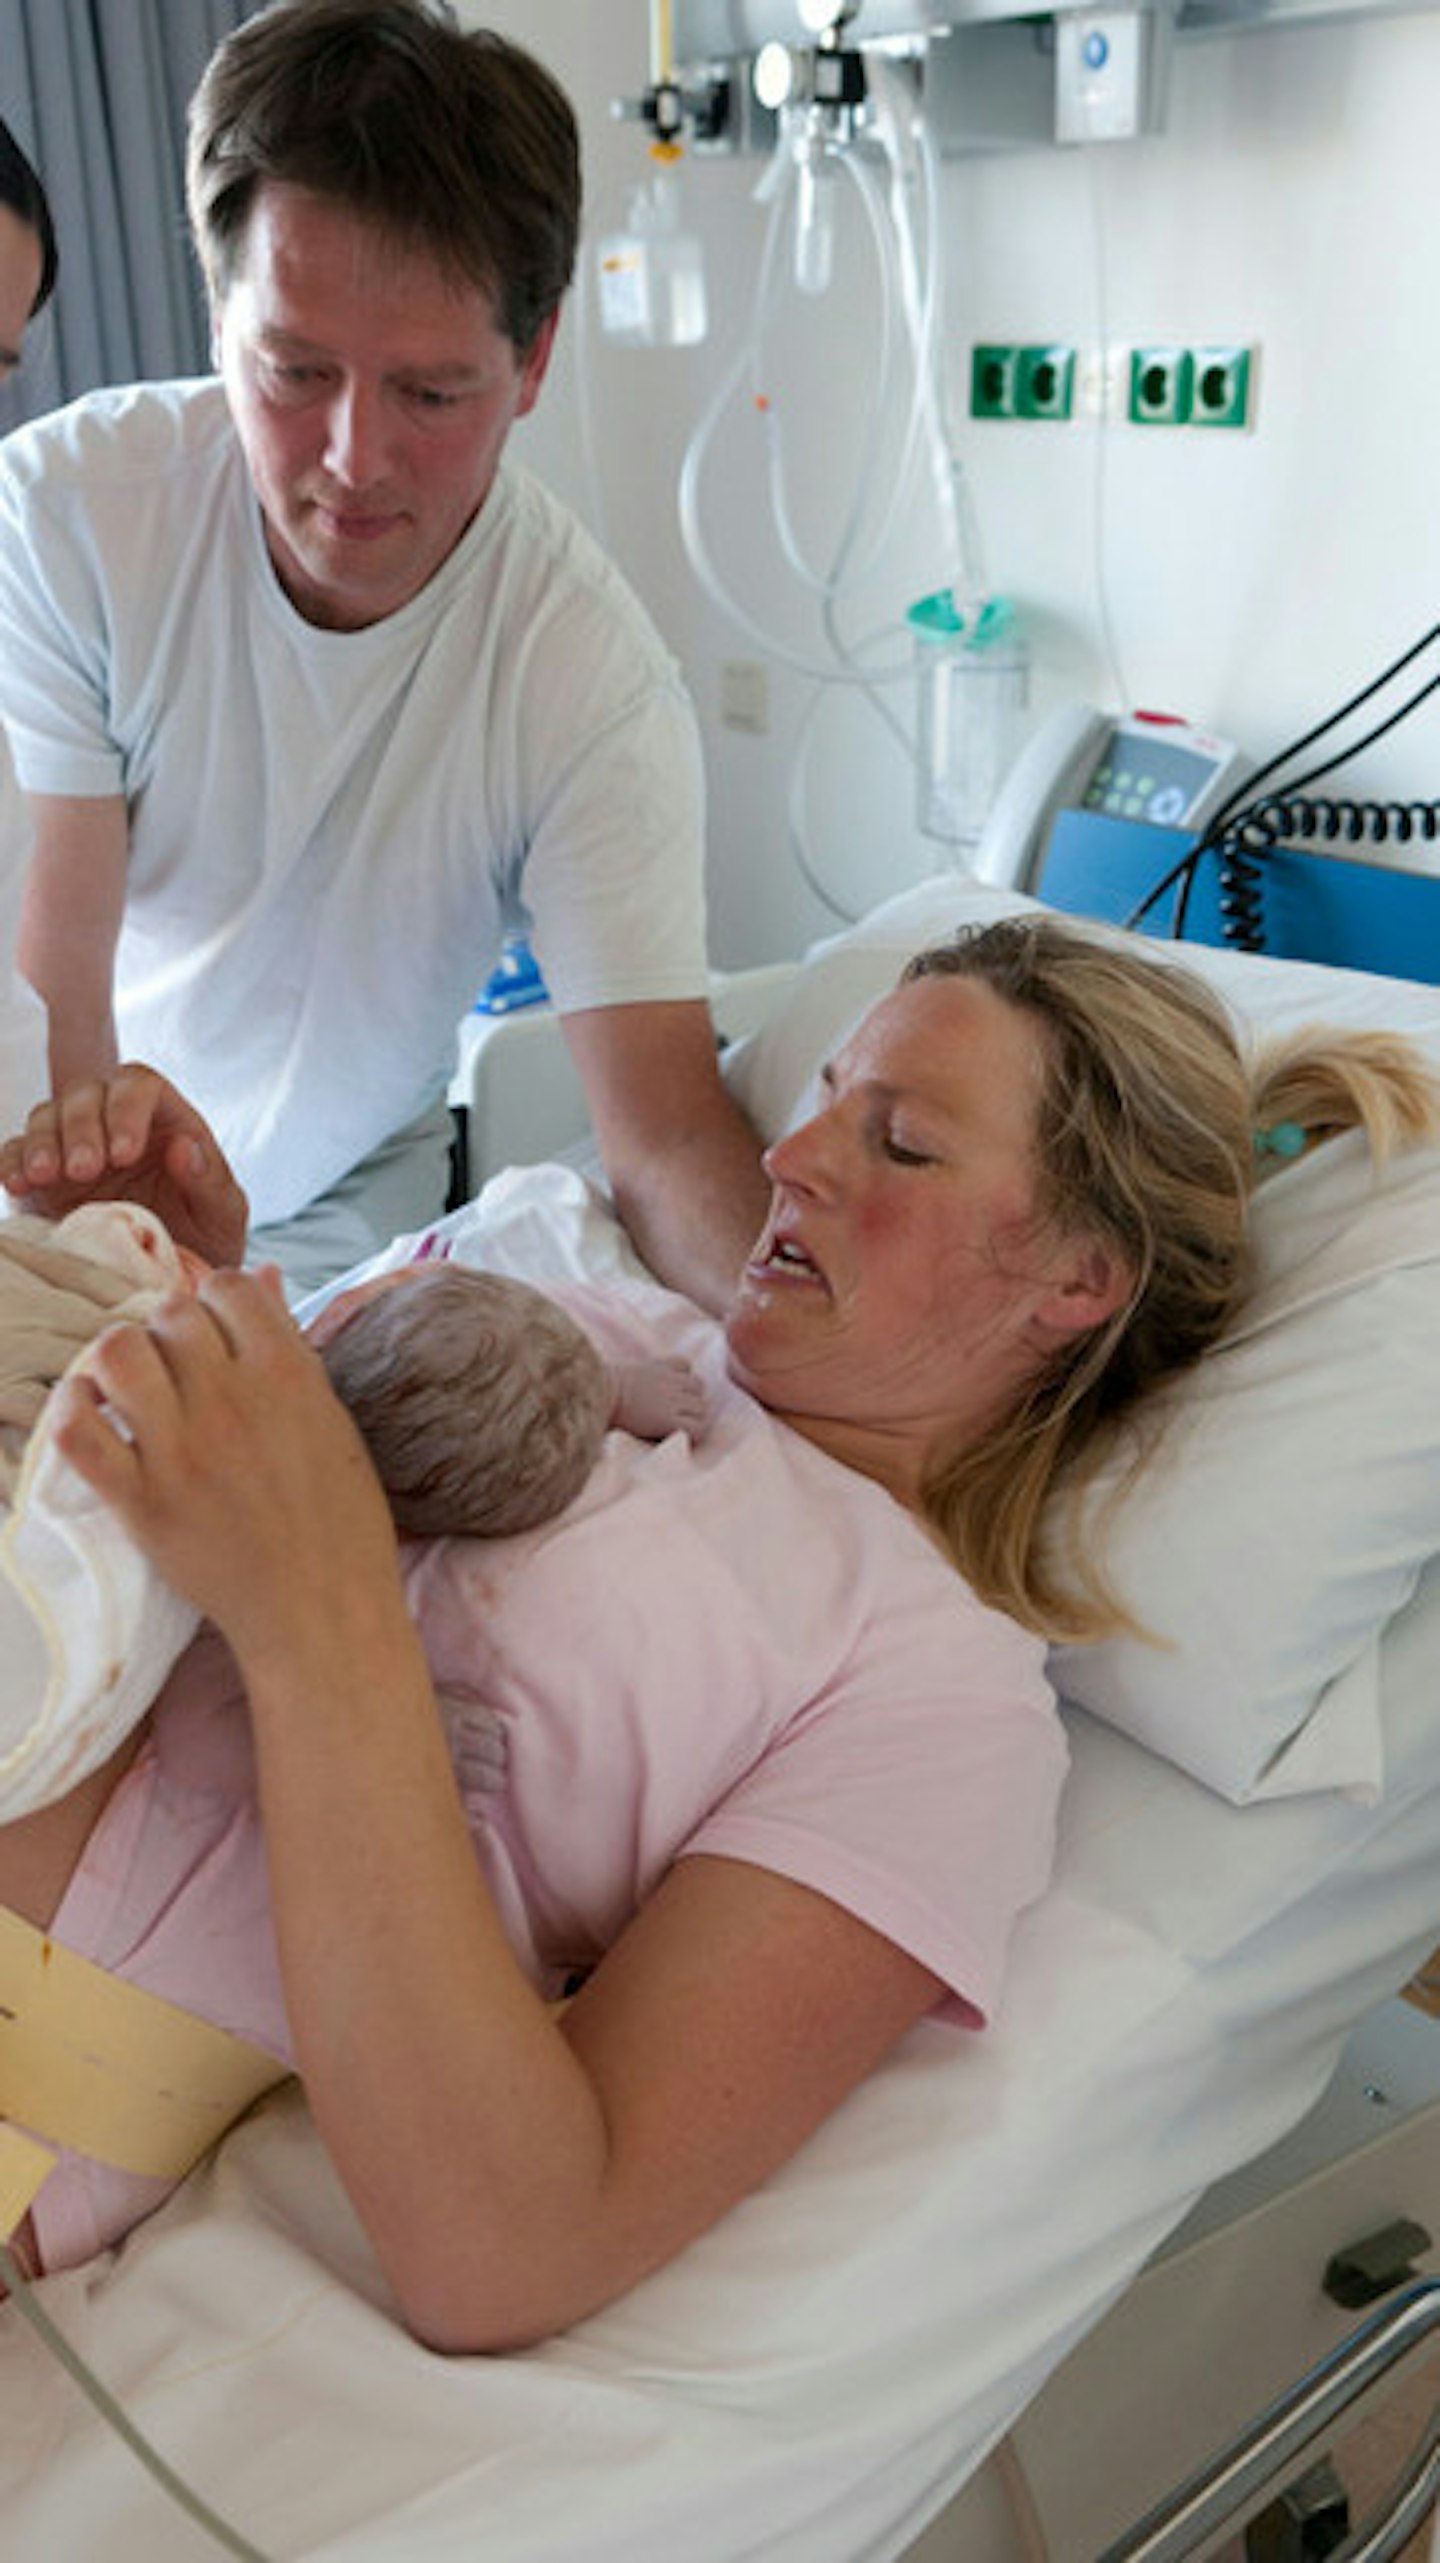 The woman was told to 'hurry up' as she gave birth (stock image)